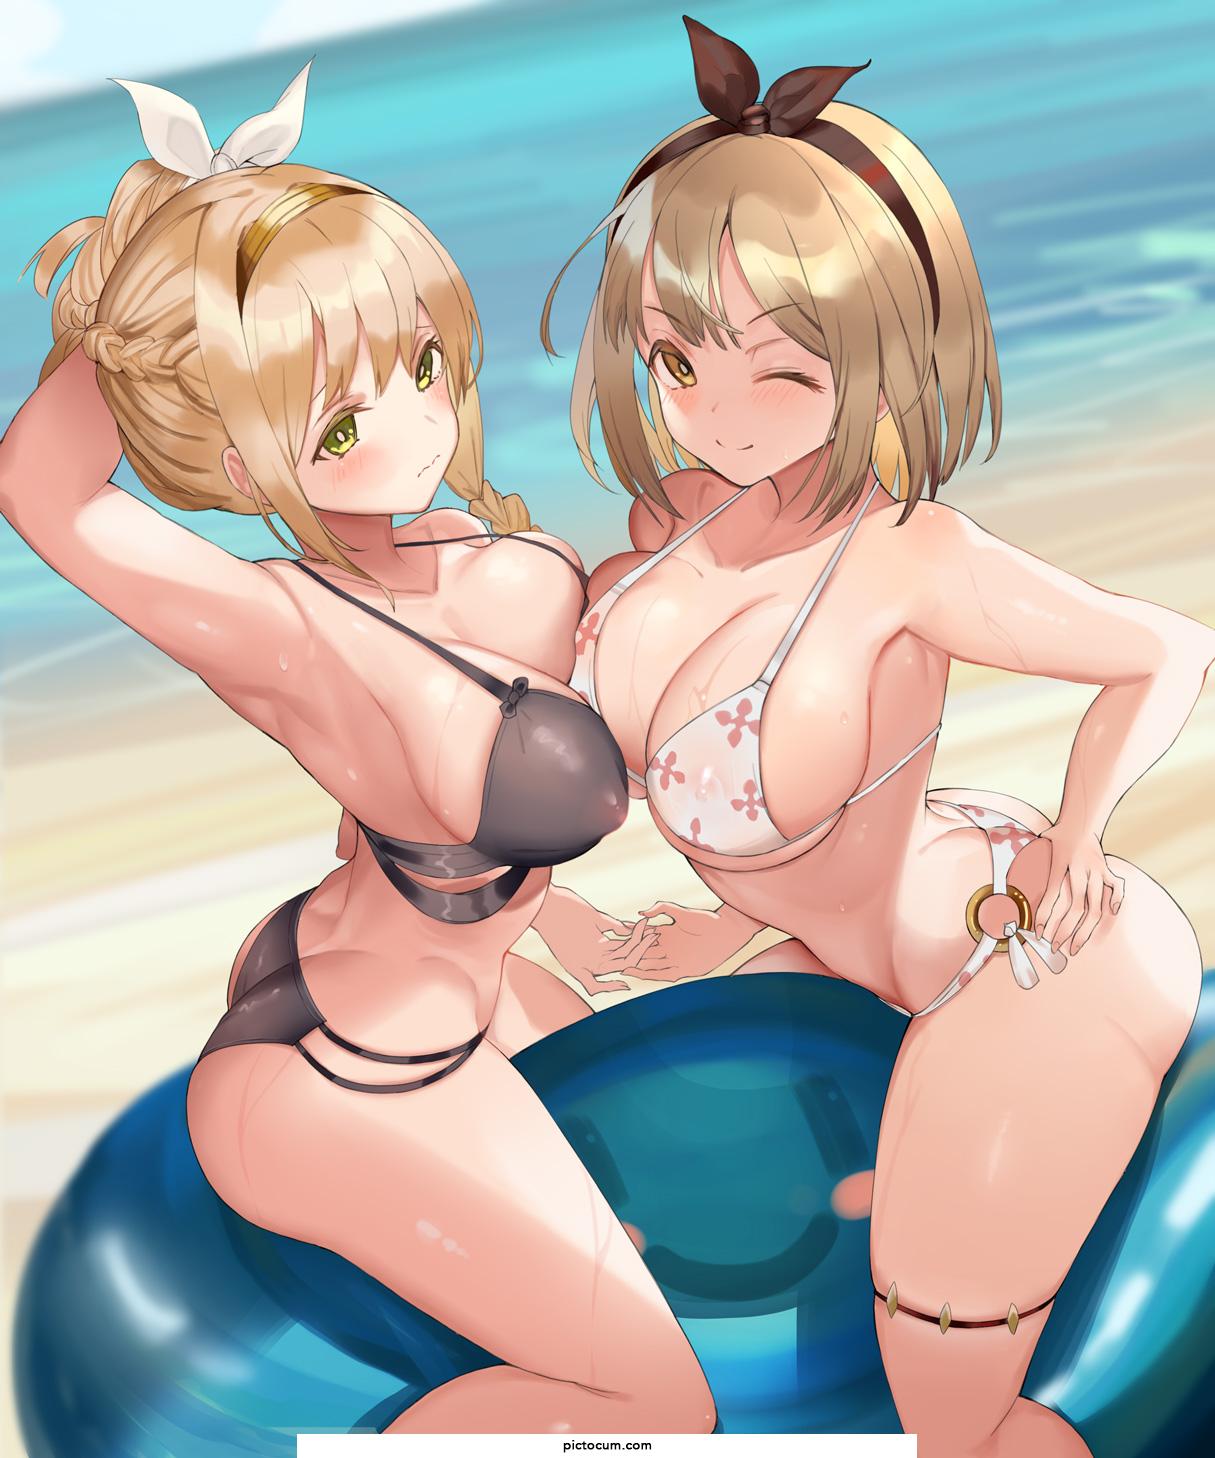 They are having fun at the beach